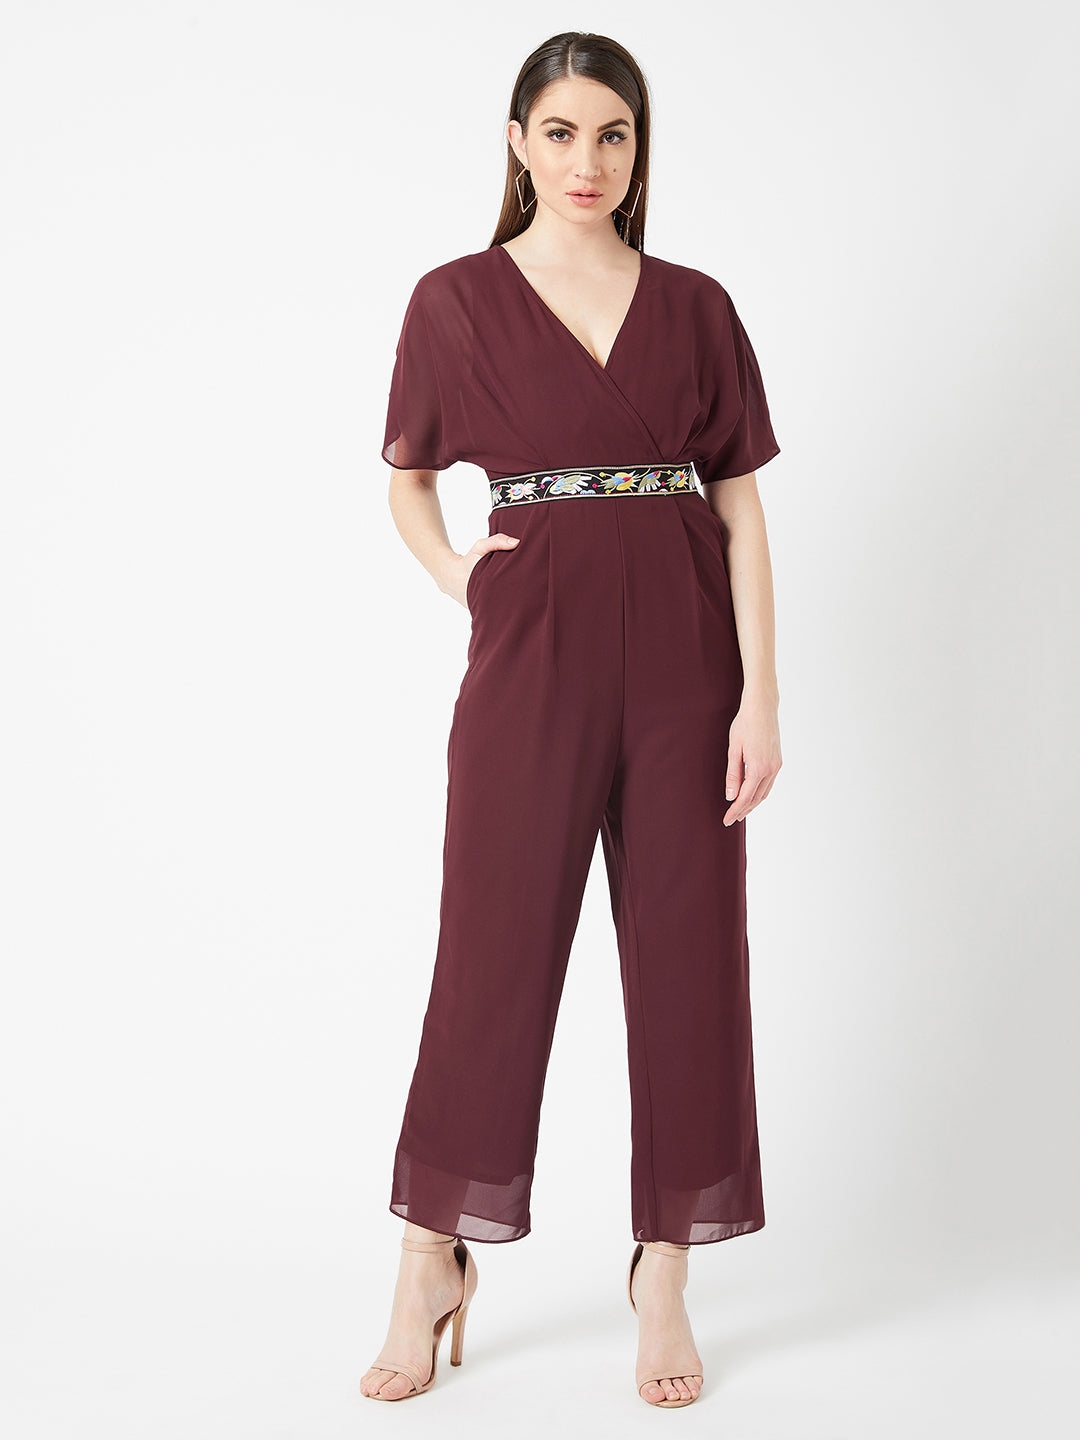 Women's Red Georgette  Jumpsuits